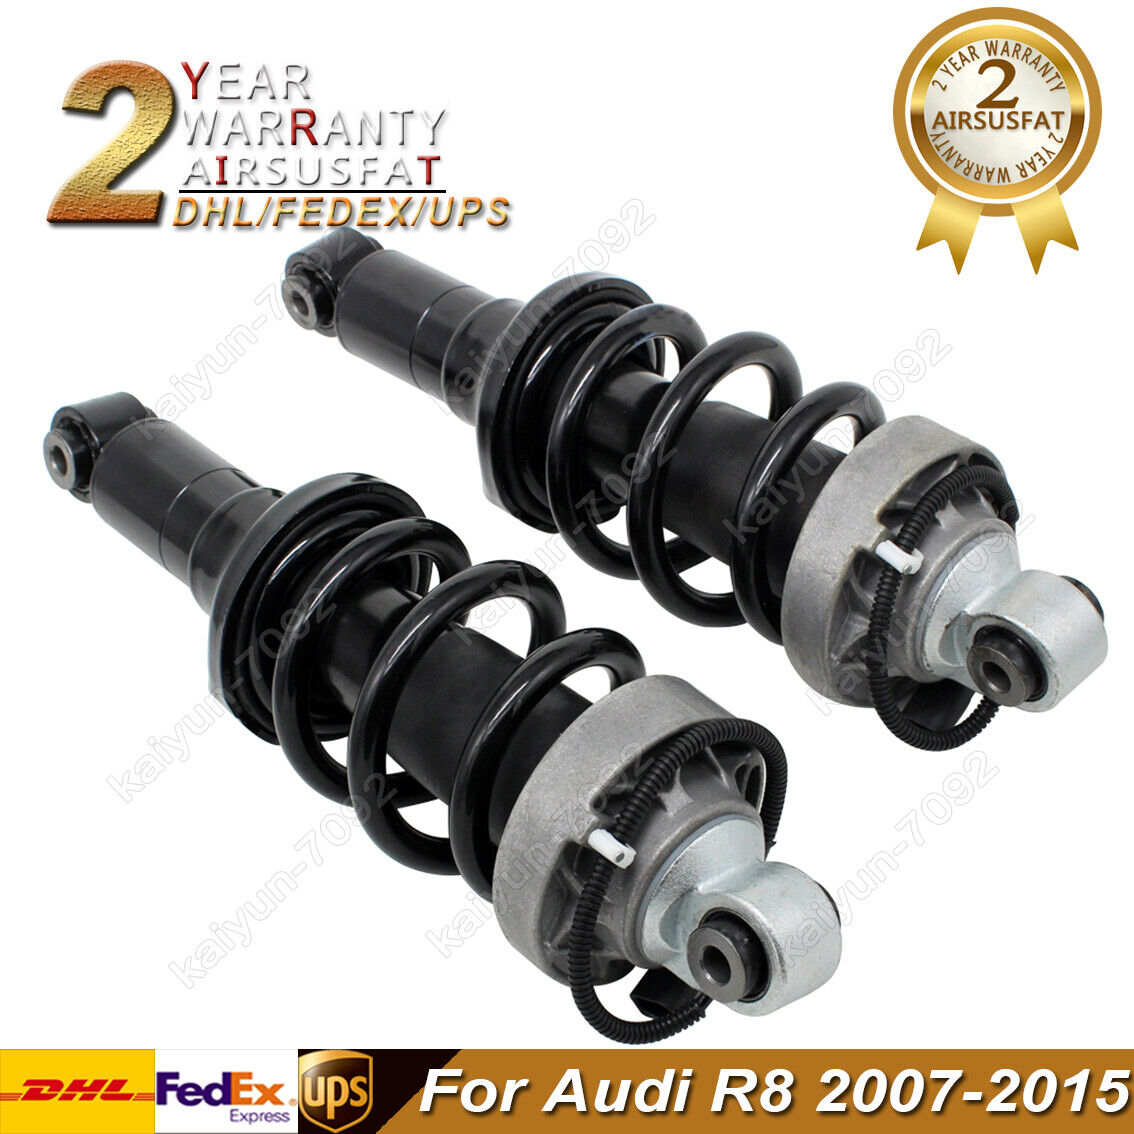 2X Front Air Suspension Shock Absorbers For Audi R8 420412019AH 420412020AH New